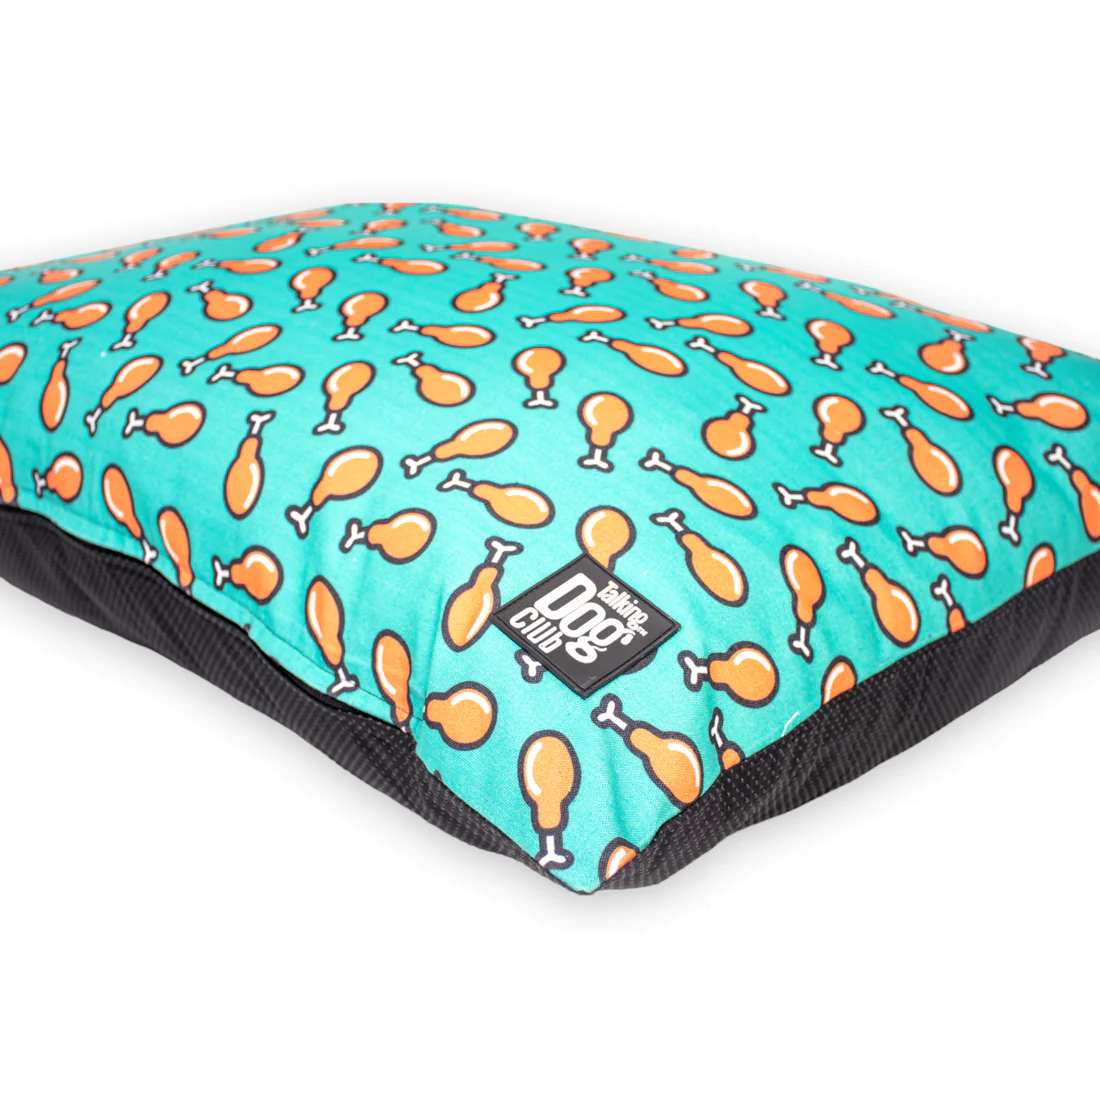 Talking Dog Club Love them Chicken Legs Pillow Bed for Dogs and Cats (Green)